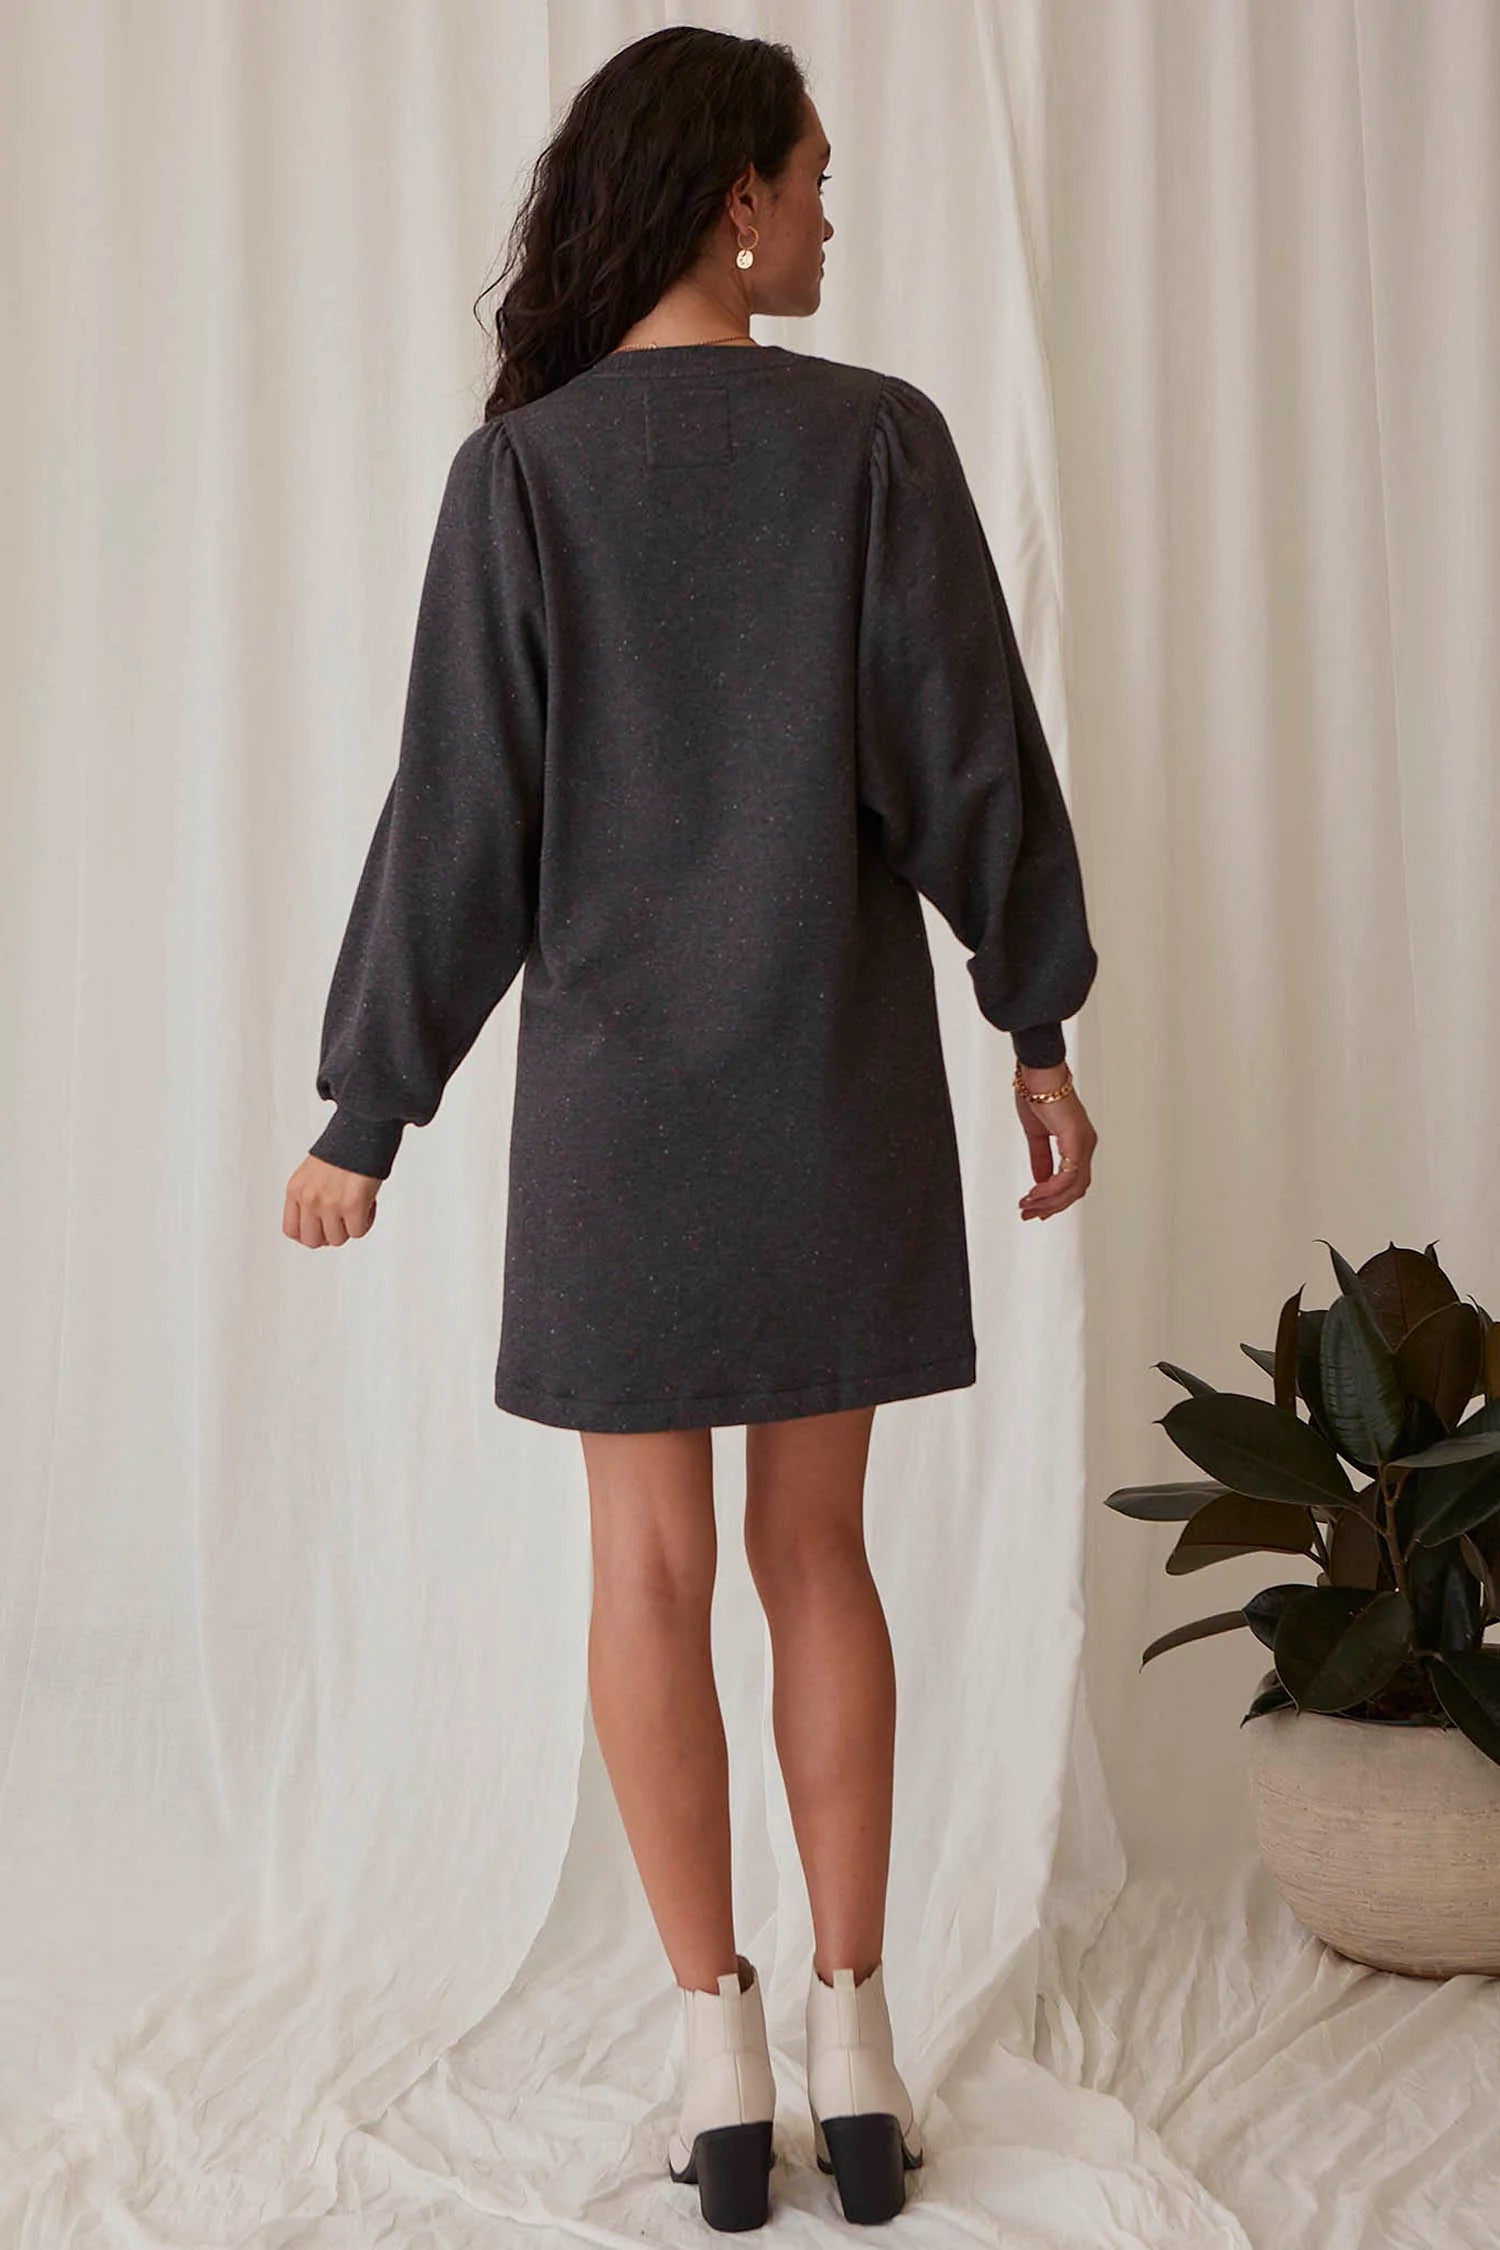 sustainable cotton dress long sleeves in charcoal grey